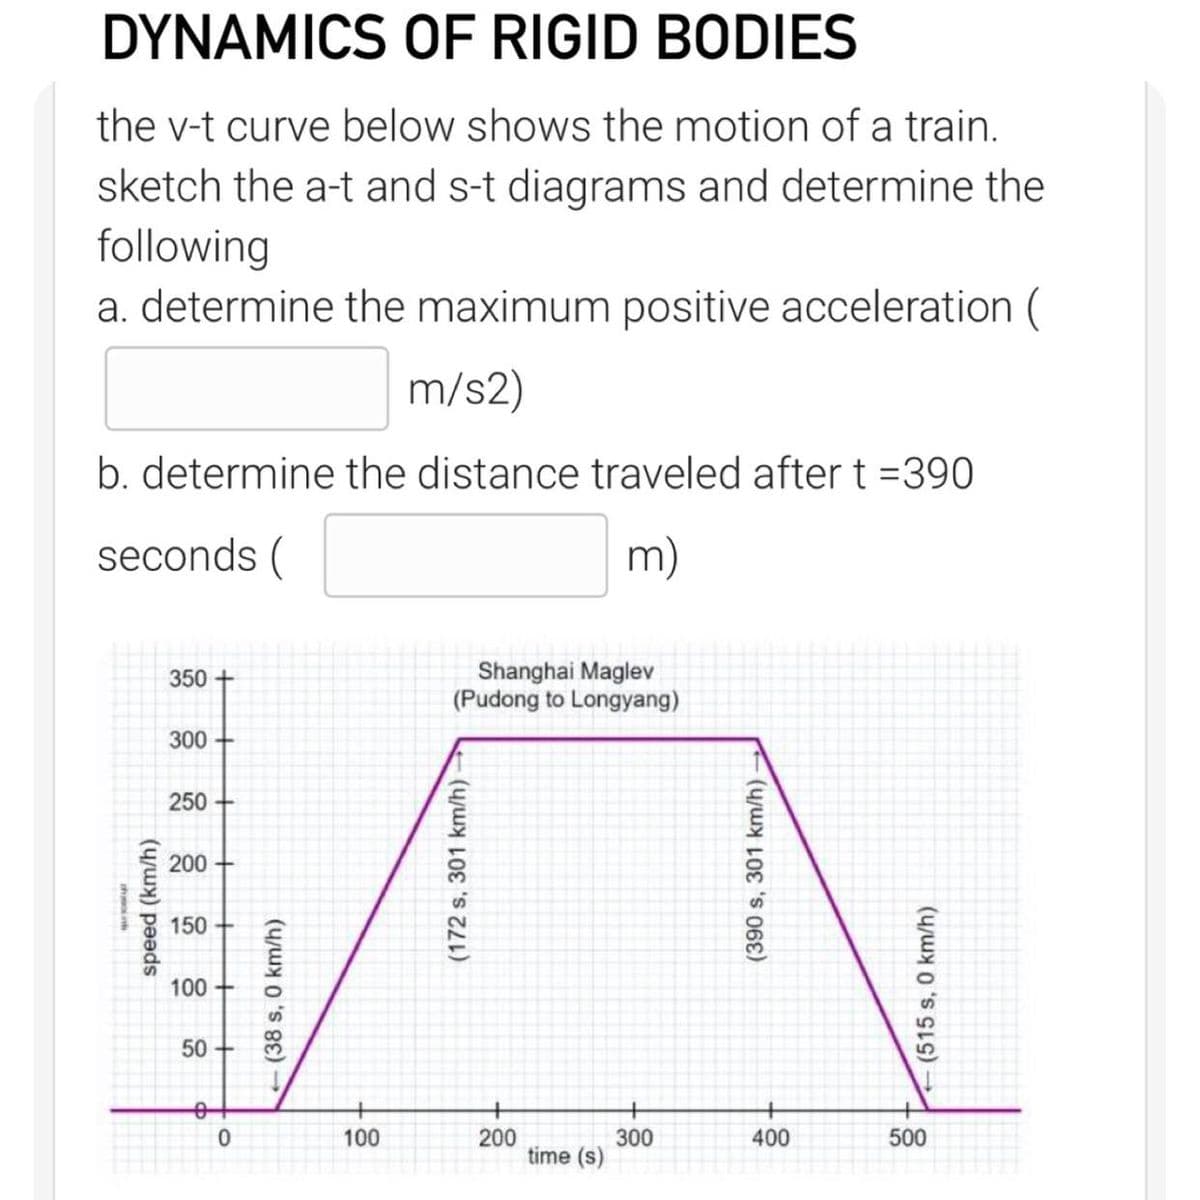 DYNAMICS OF RIGID BODIES
the v-t curve below shows the motion of a train.
sketch the a-t and s-t diagrams and determine the
following
a. determine the maximum positive acceleration (
m/s2)
b. determine the distance traveled after t =390
seconds (
m)
Shanghai Maglev
(Pudong to Longyang)
350
300
250
200 +
150 +
100+
50 +
+
100
200
time (s)
300
400
500
speed (km/h)
(38 s, 0 km/h)
(172 s, 301 km/h)
(390 s, 301 km/h)
(515 s, 0 km/h)
